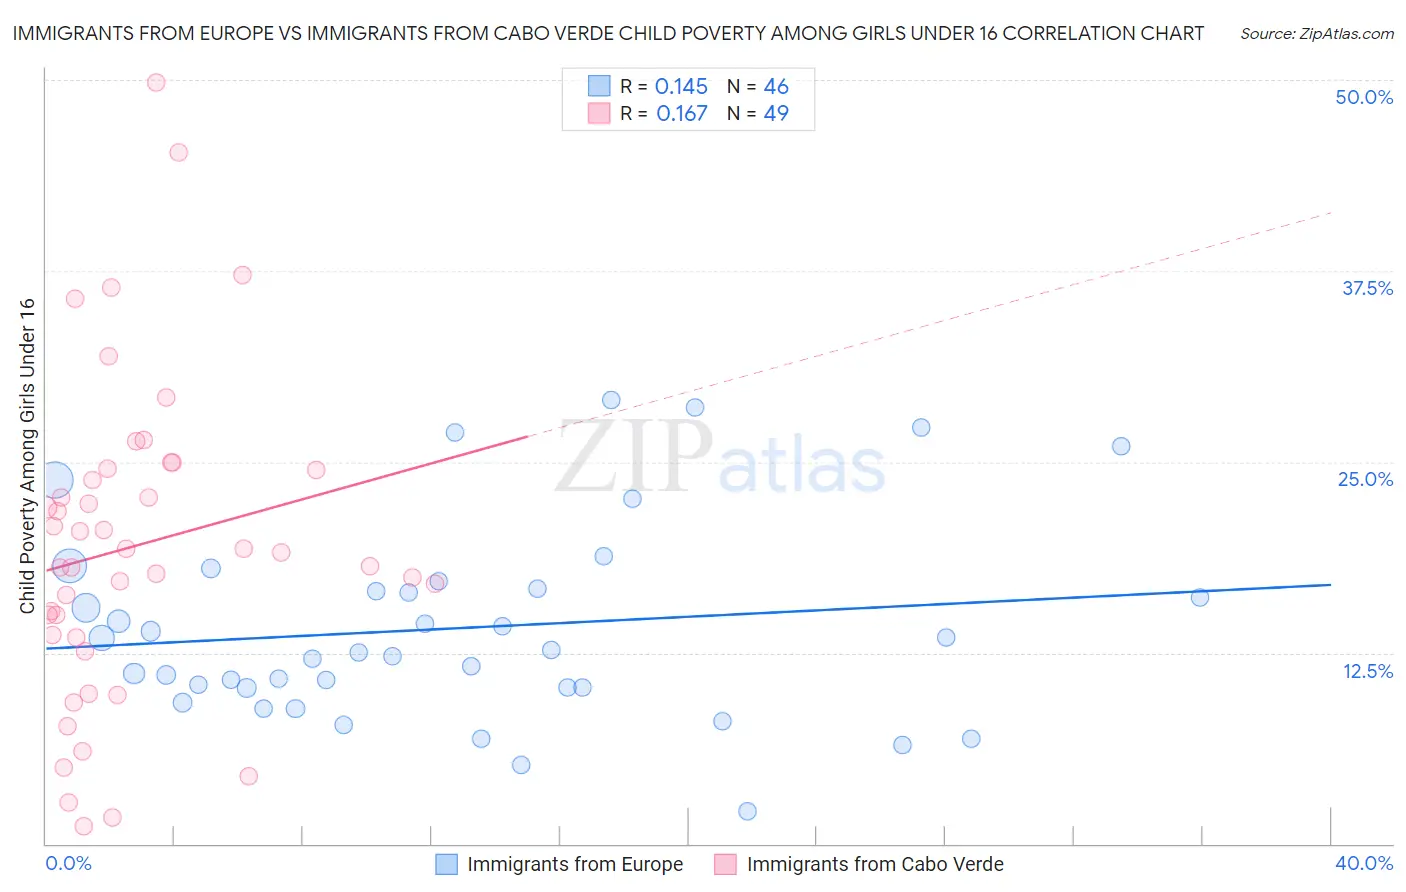 Immigrants from Europe vs Immigrants from Cabo Verde Child Poverty Among Girls Under 16